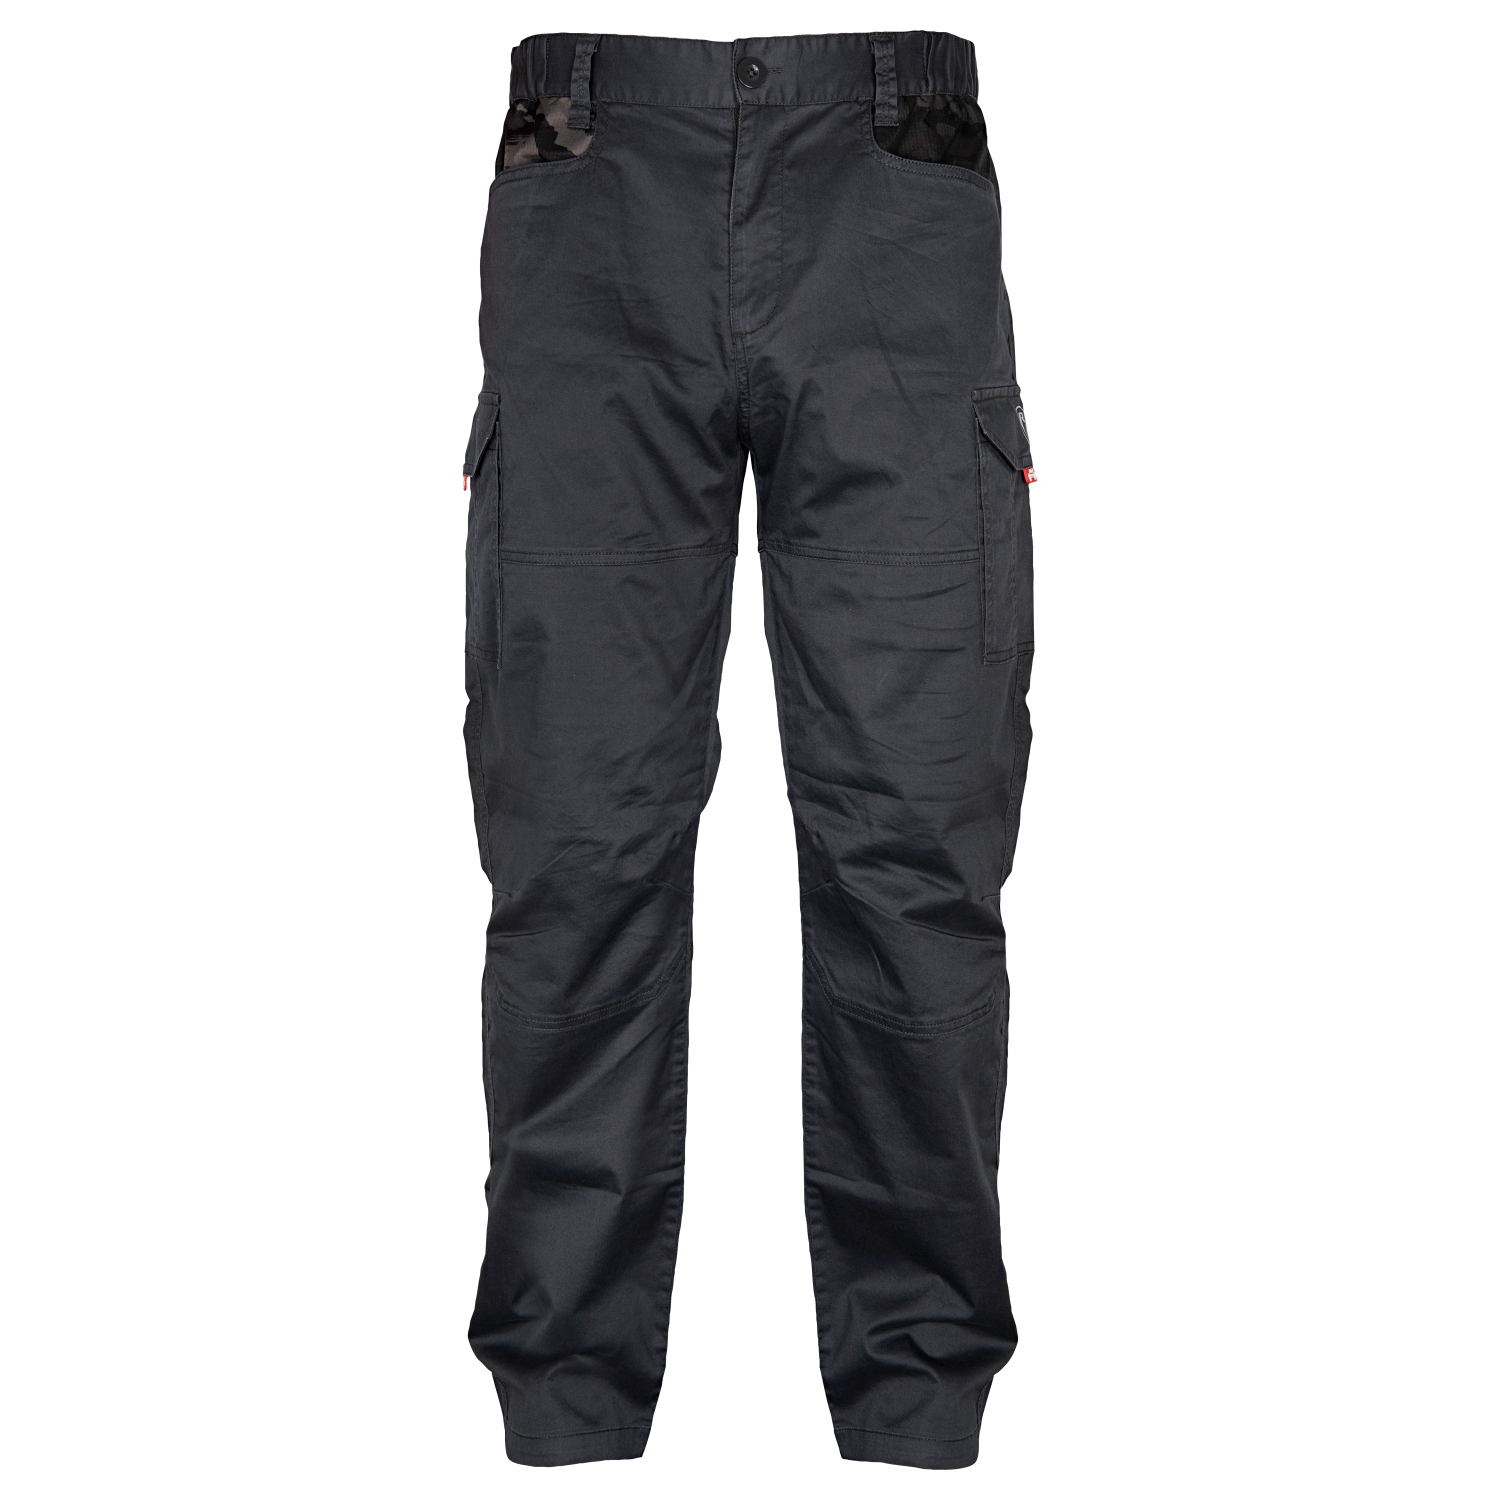 Fox Rage Mens Pants Lightweight Combats at low prices